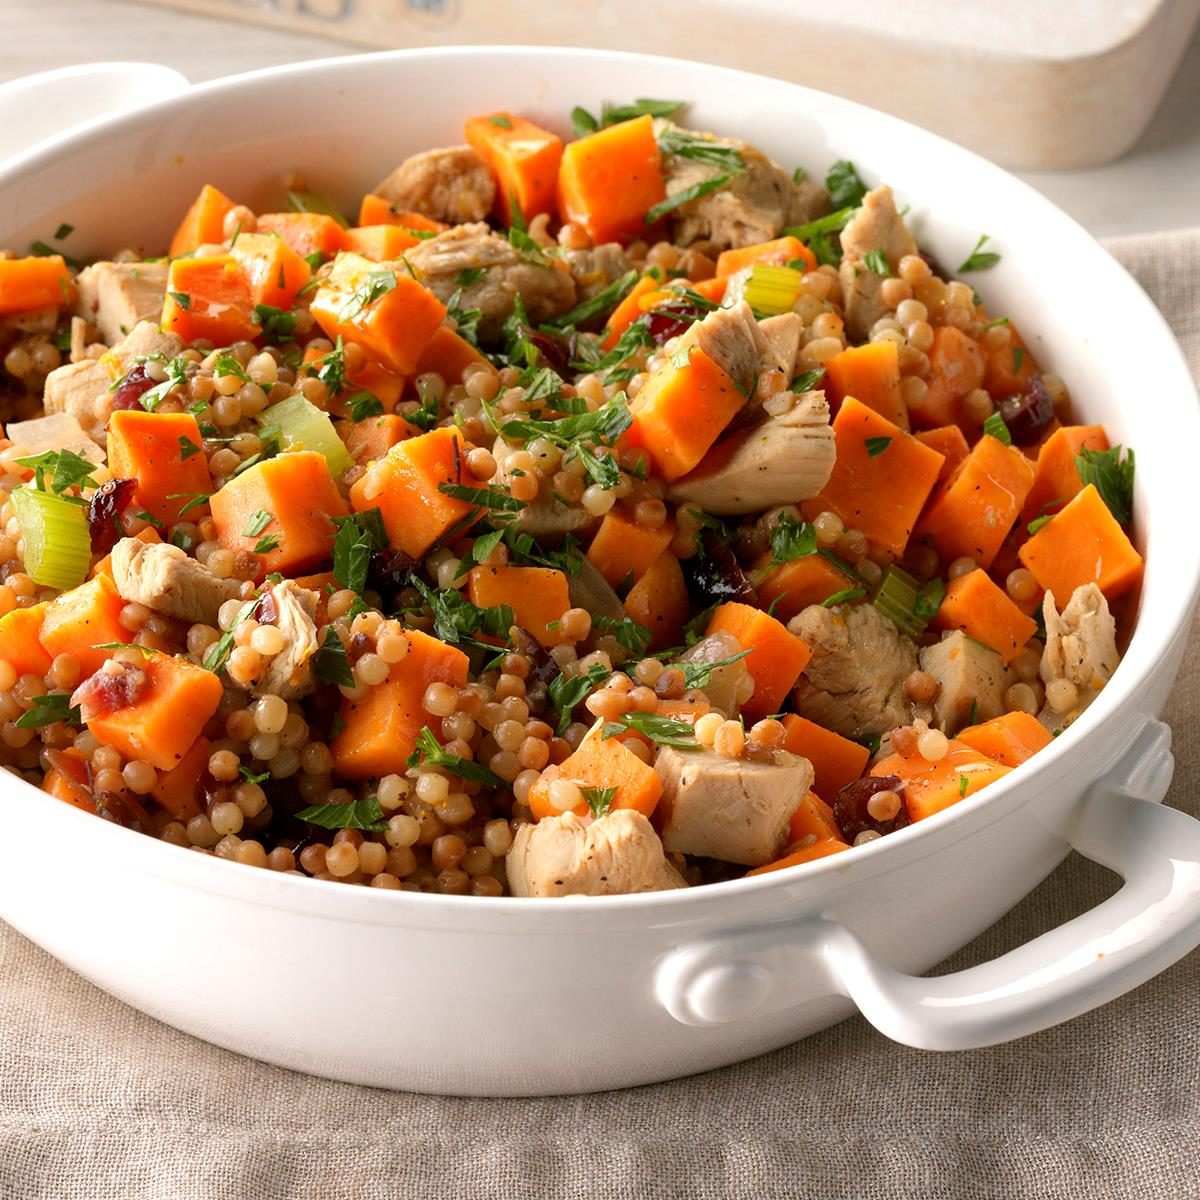 Day 21: Sweet Potato and Turkey Couscous